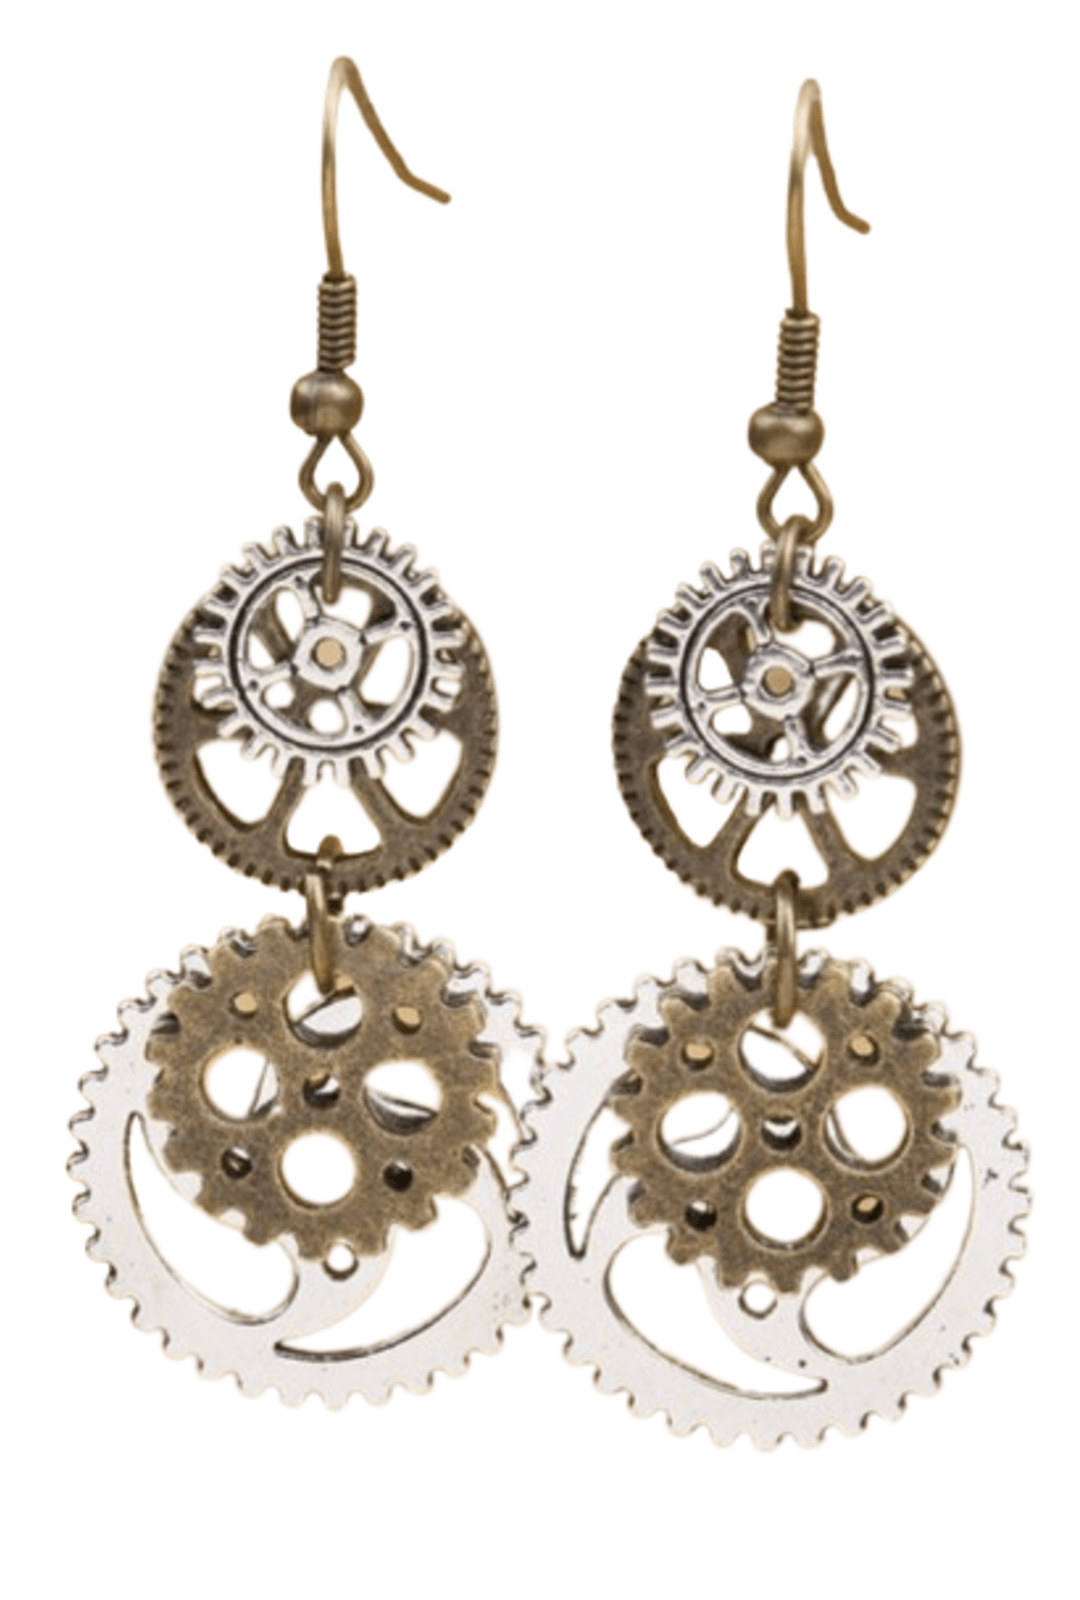 Steampunk Silver and Bronze Cog Earrings (P)